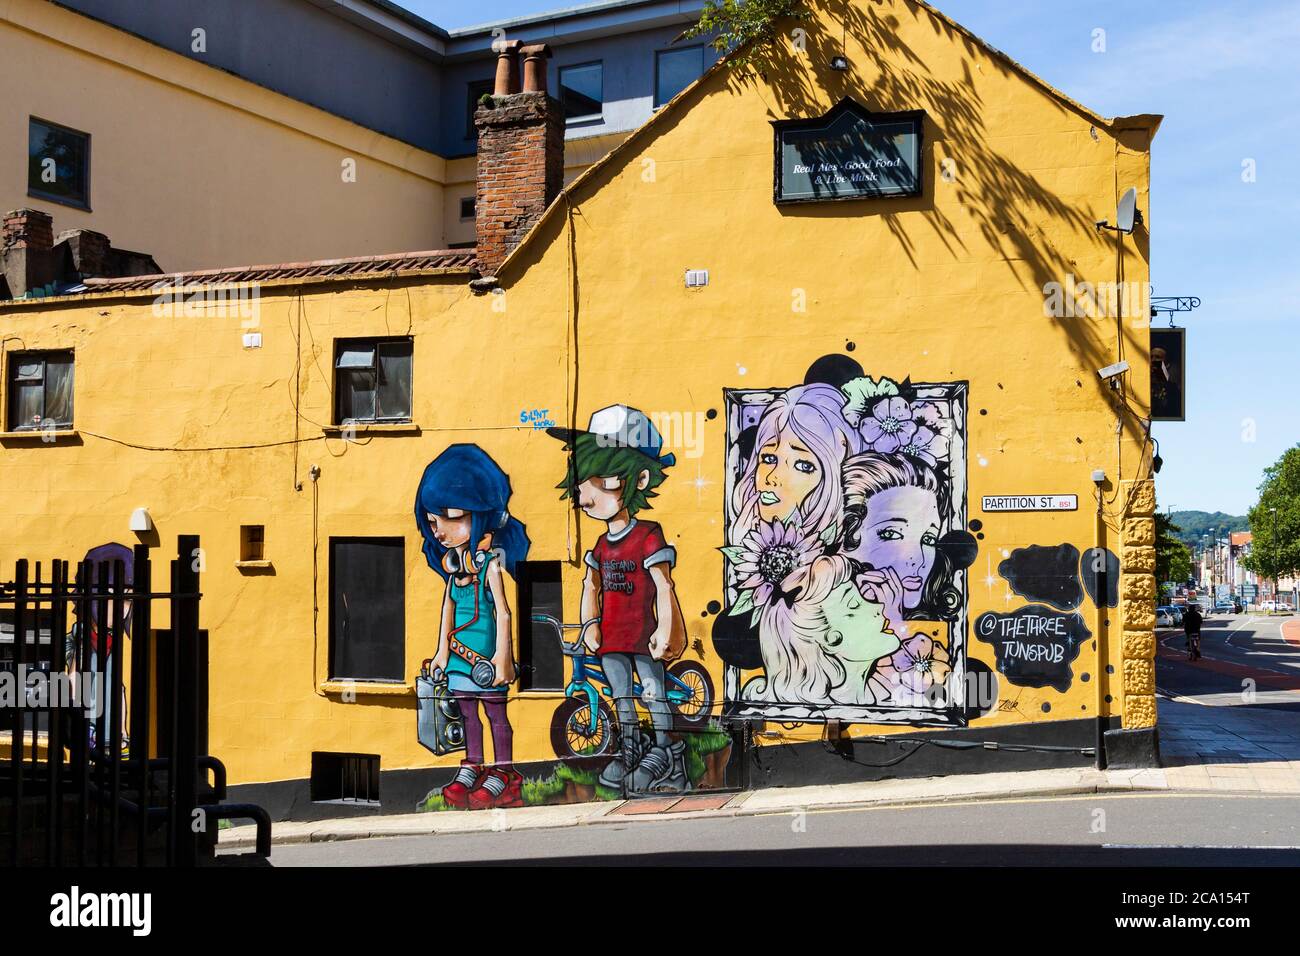 Mural painted on the side of the Three Tuns public house, Partition Street, Bristol, England. July 2020 Stock Photo